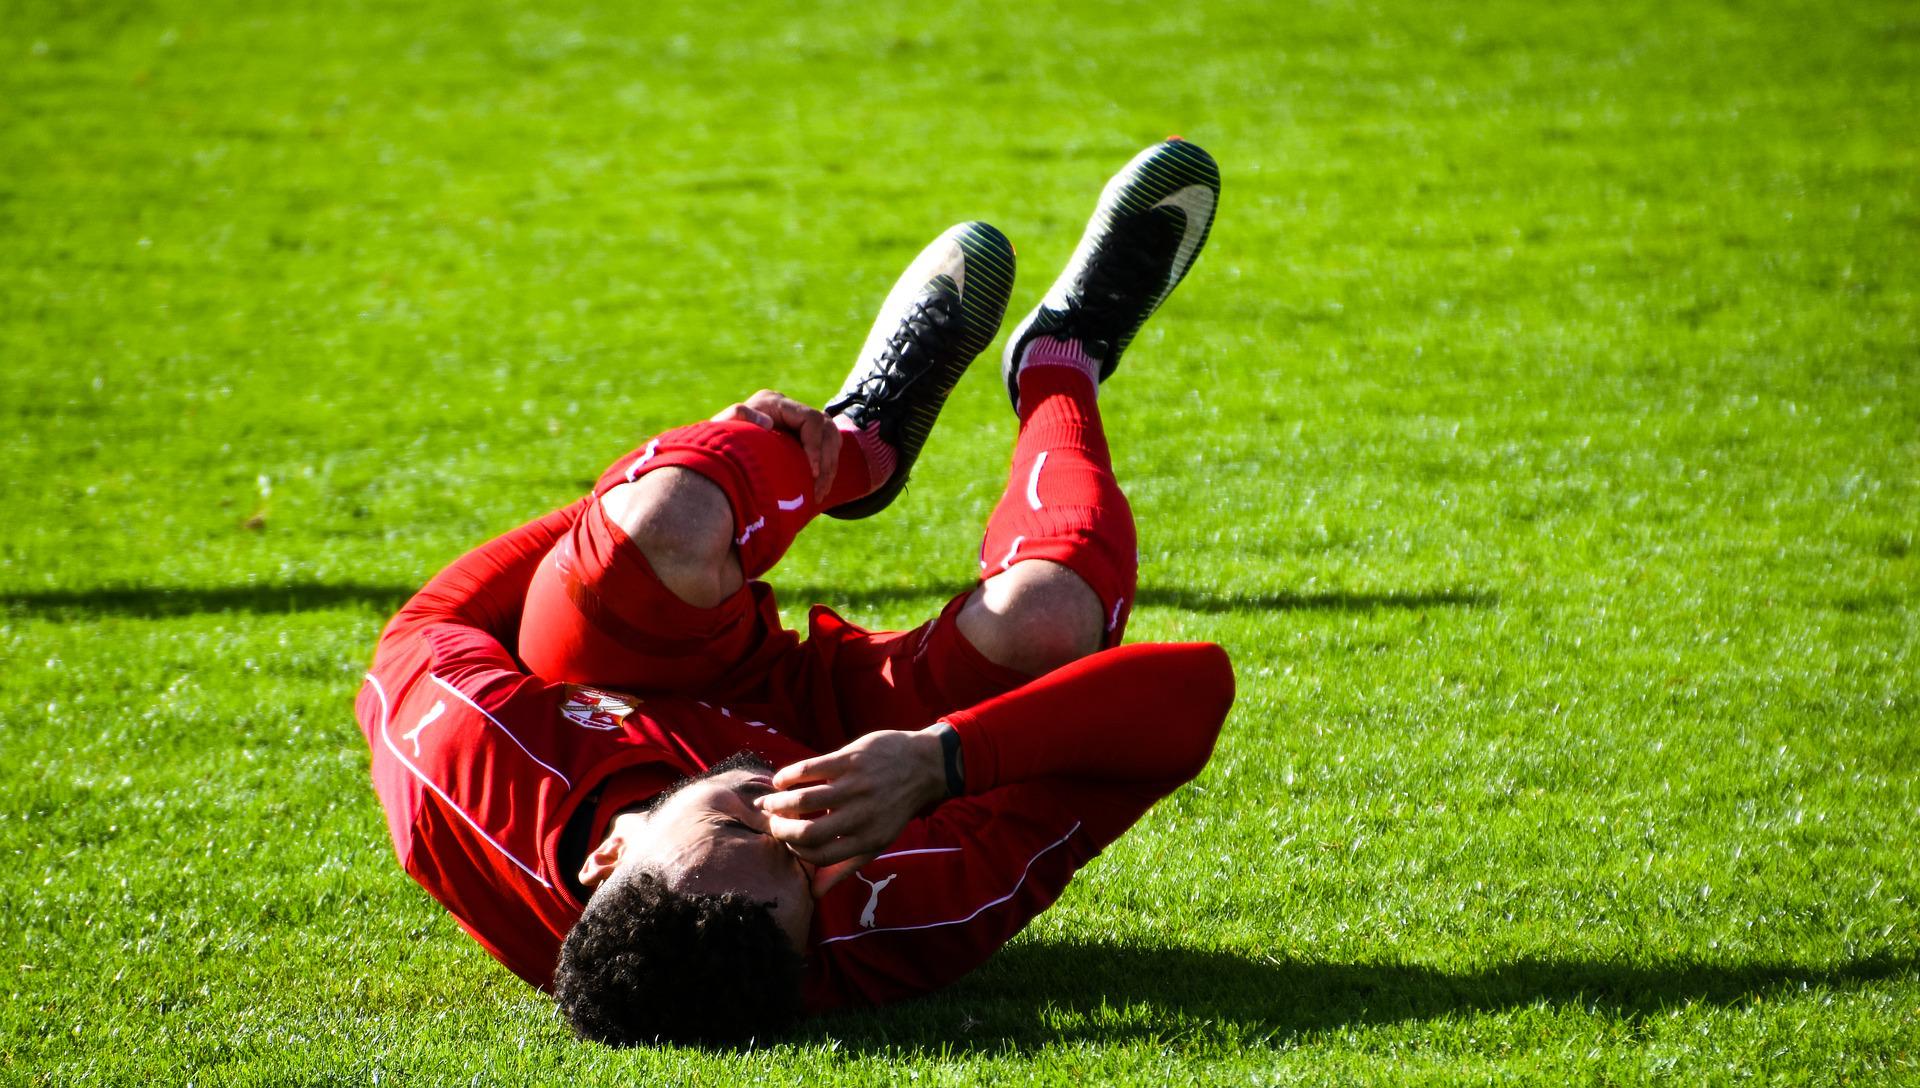 A football player in red writes in agony on the green grass